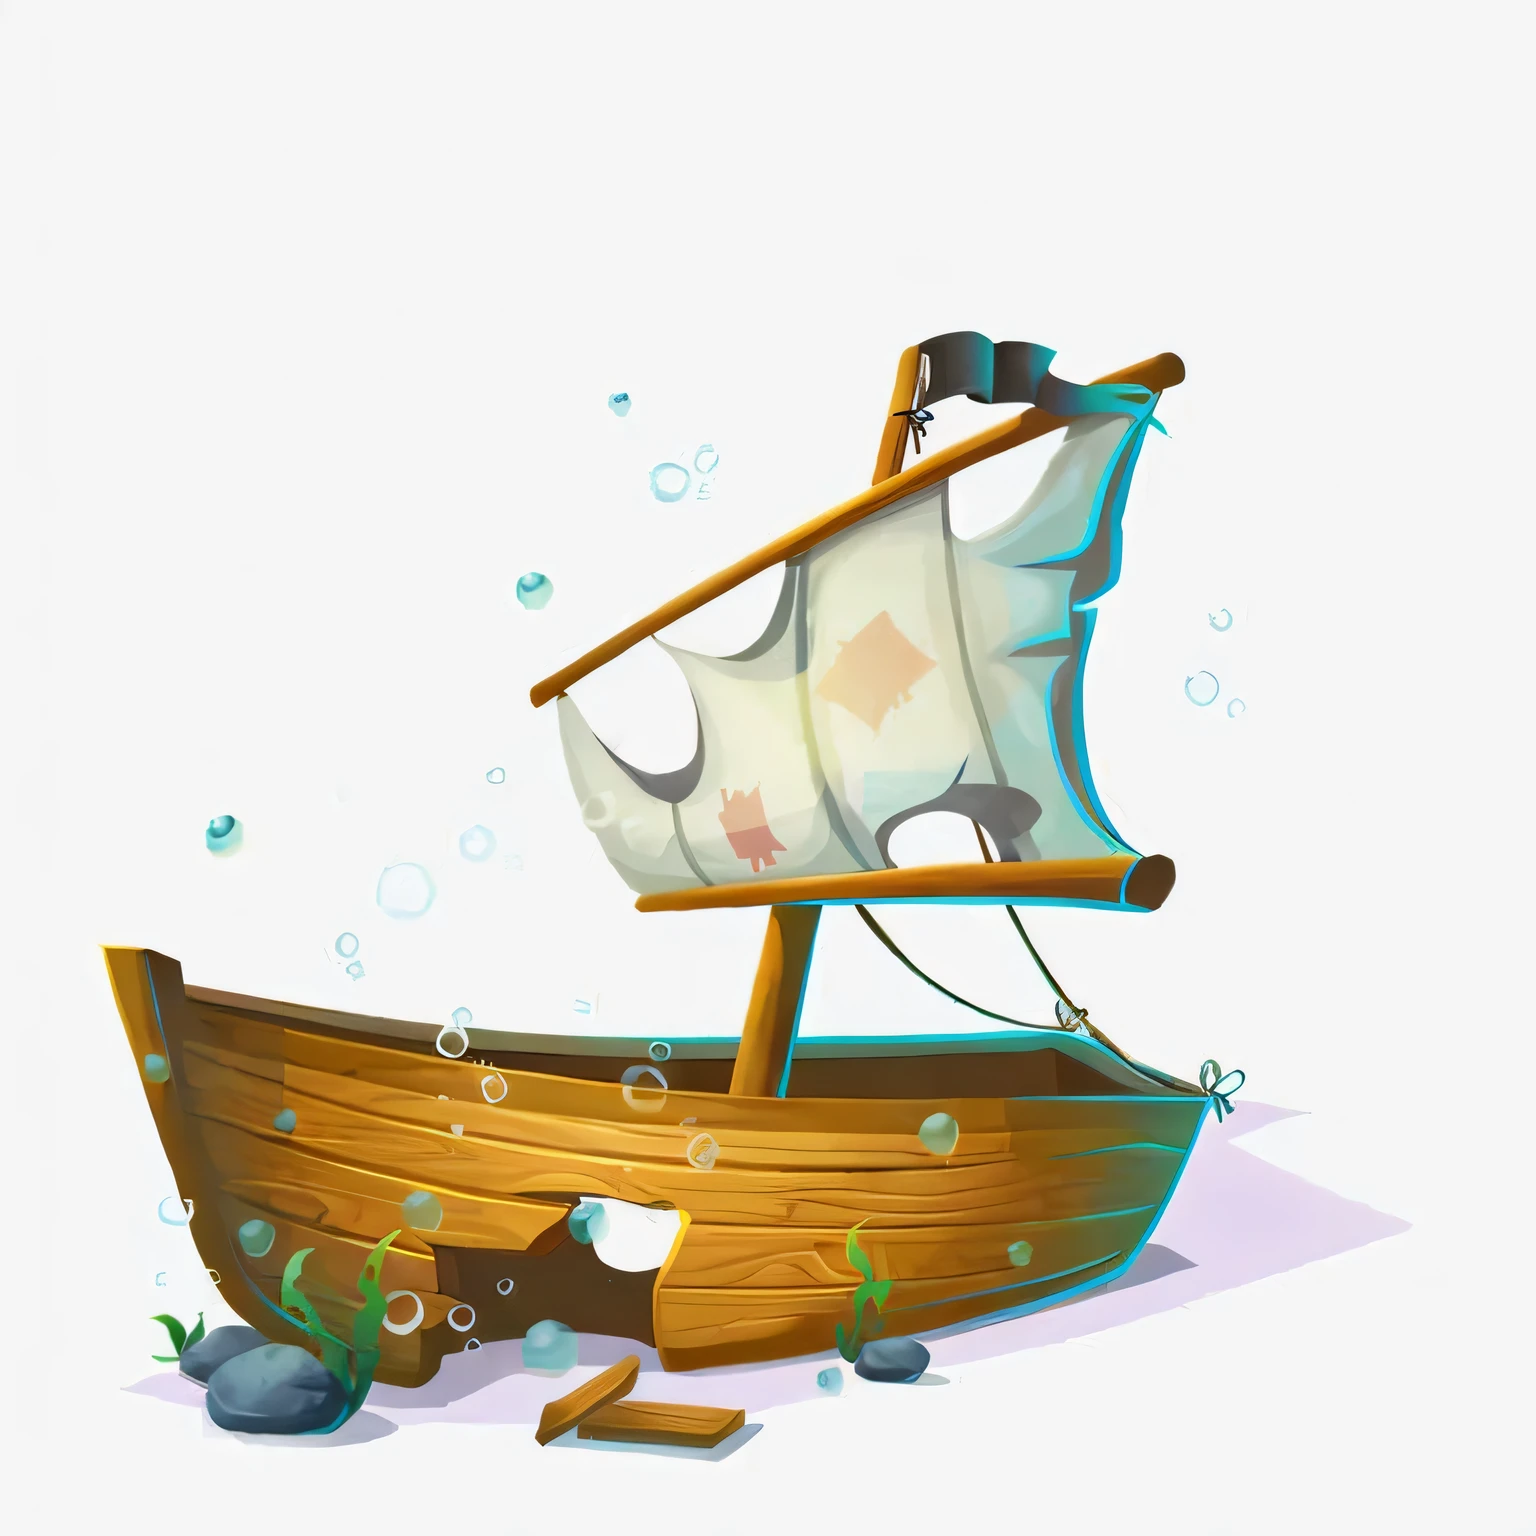 cartoon illustration of a wooden Boat with a sail and a sail, Old